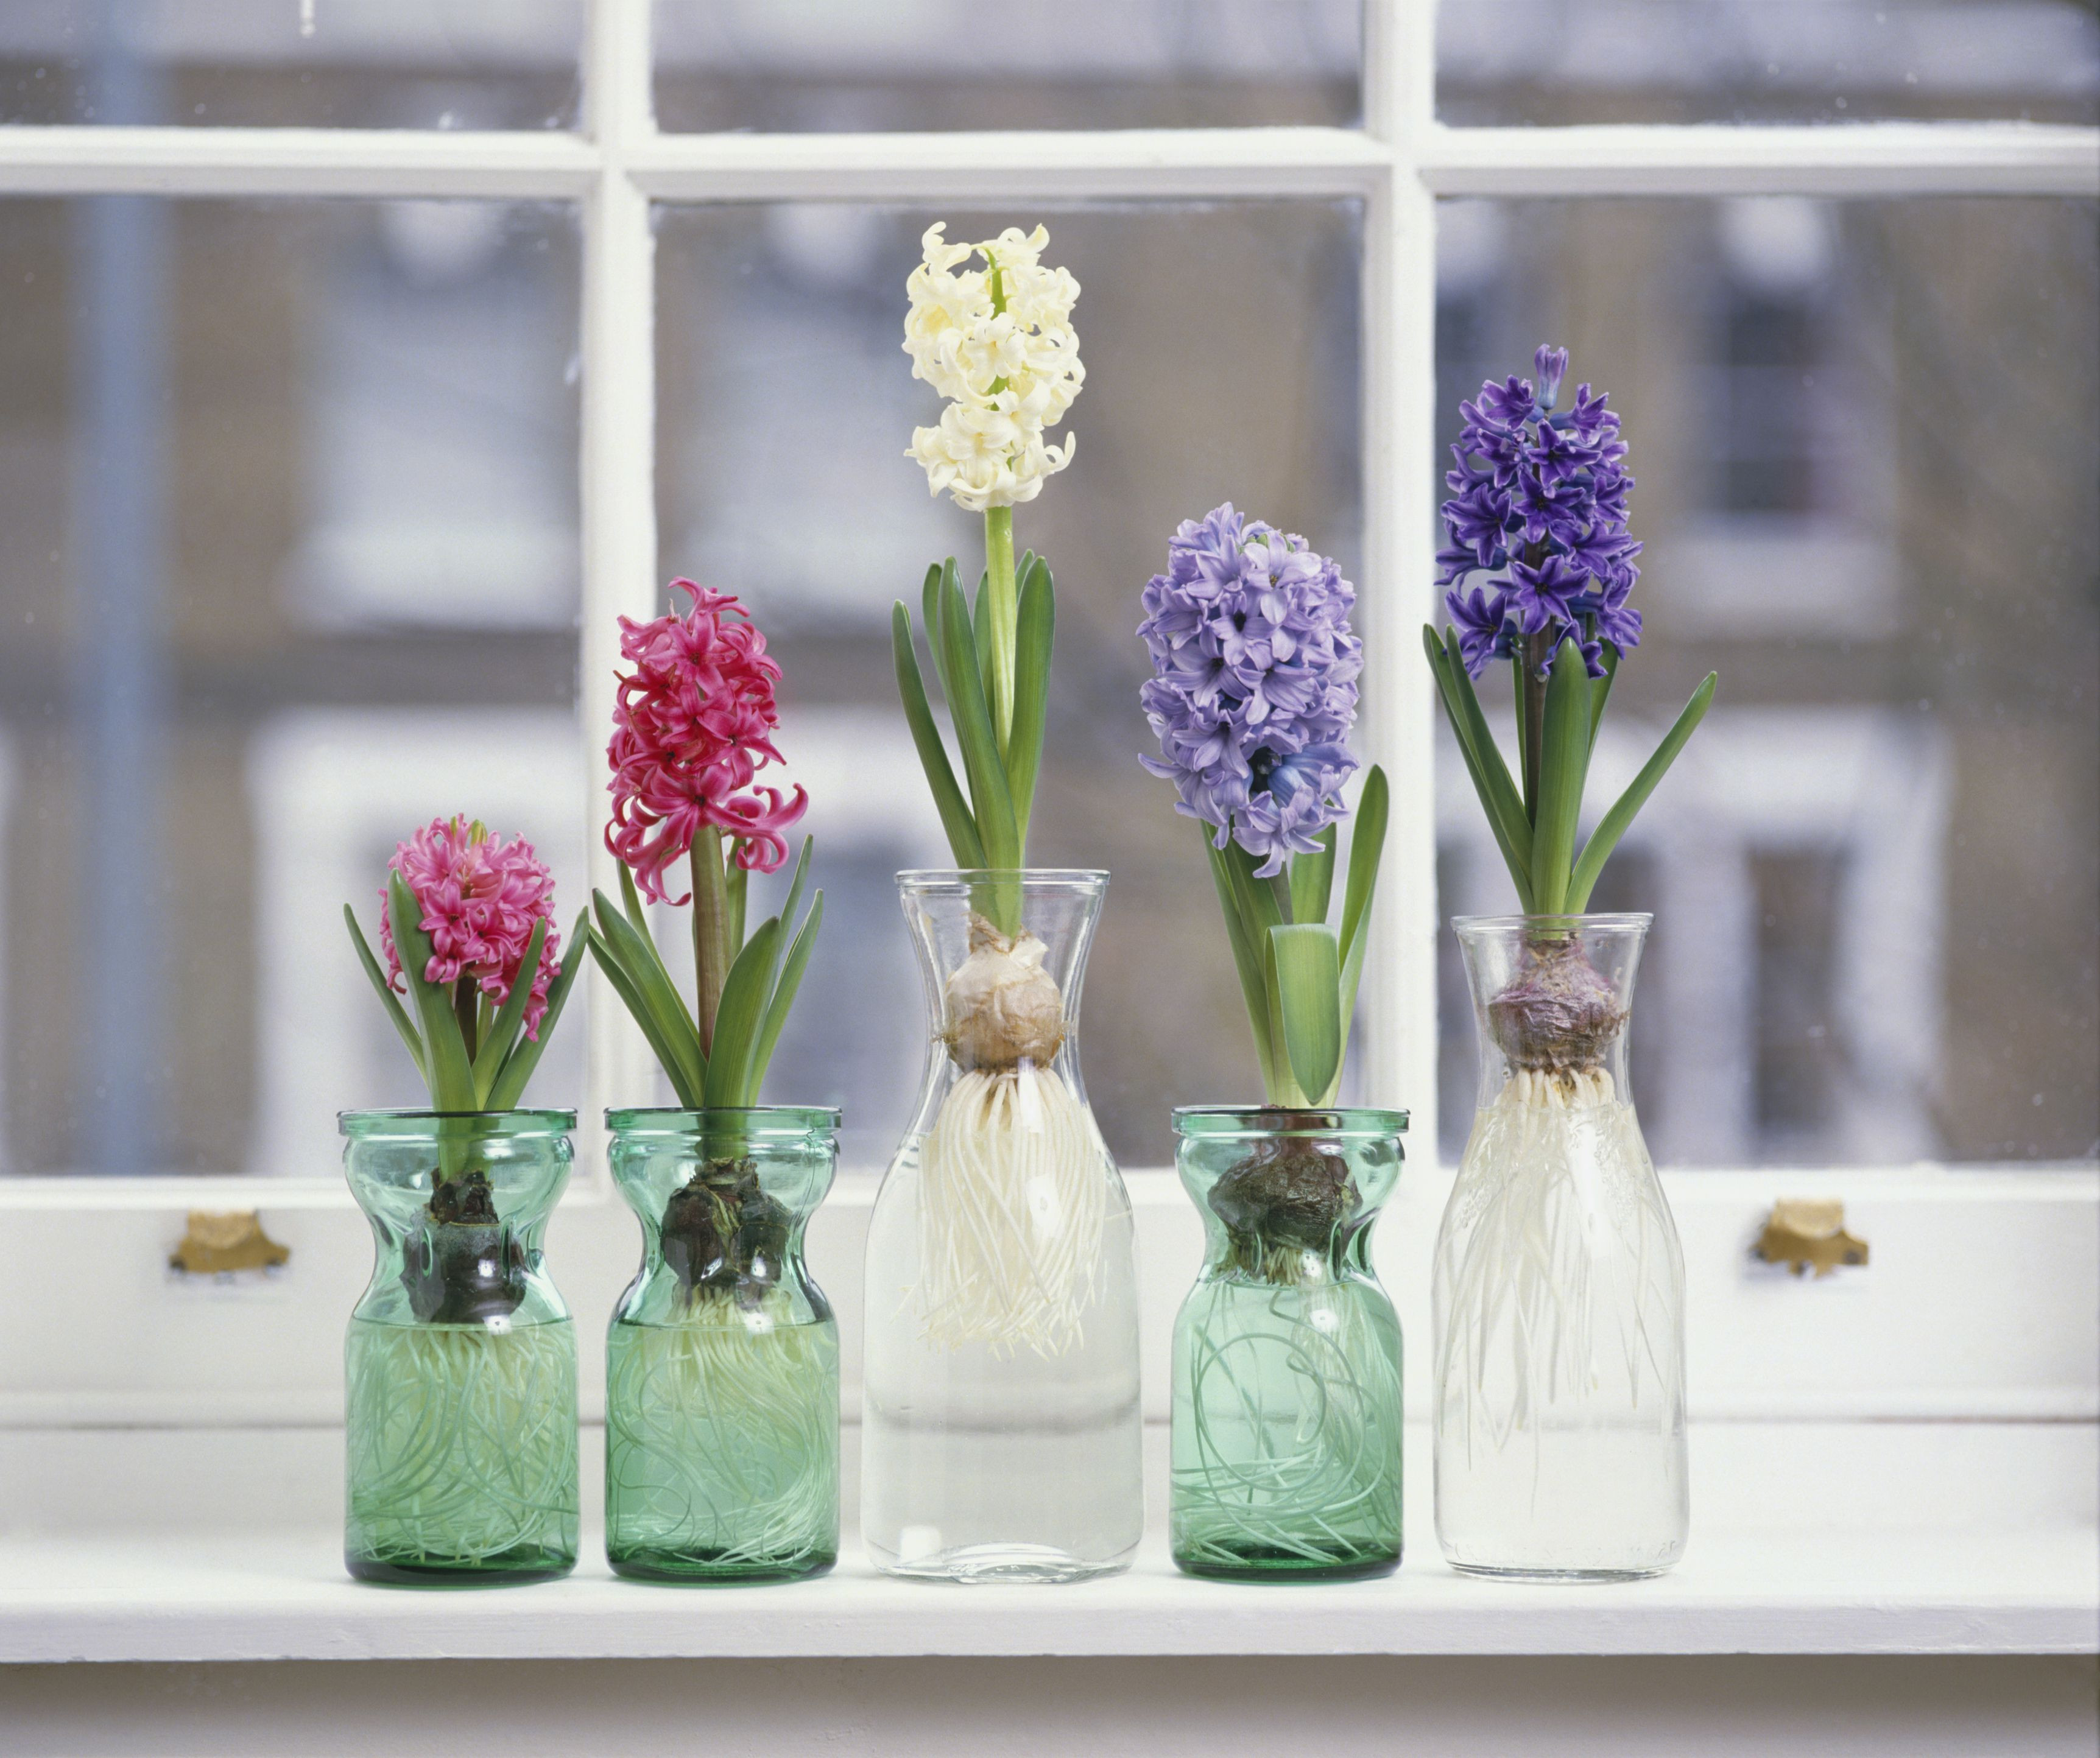 25 Fantastic Lucky Bamboo Vases Pots 2024 free download lucky bamboo vases pots of how to grow hyacinth flowers indoors regarding pink white and purple hyacinthus plants with bulbs in glass jars on window sill 125157739 57c5b8f73df78cc16ead76eb